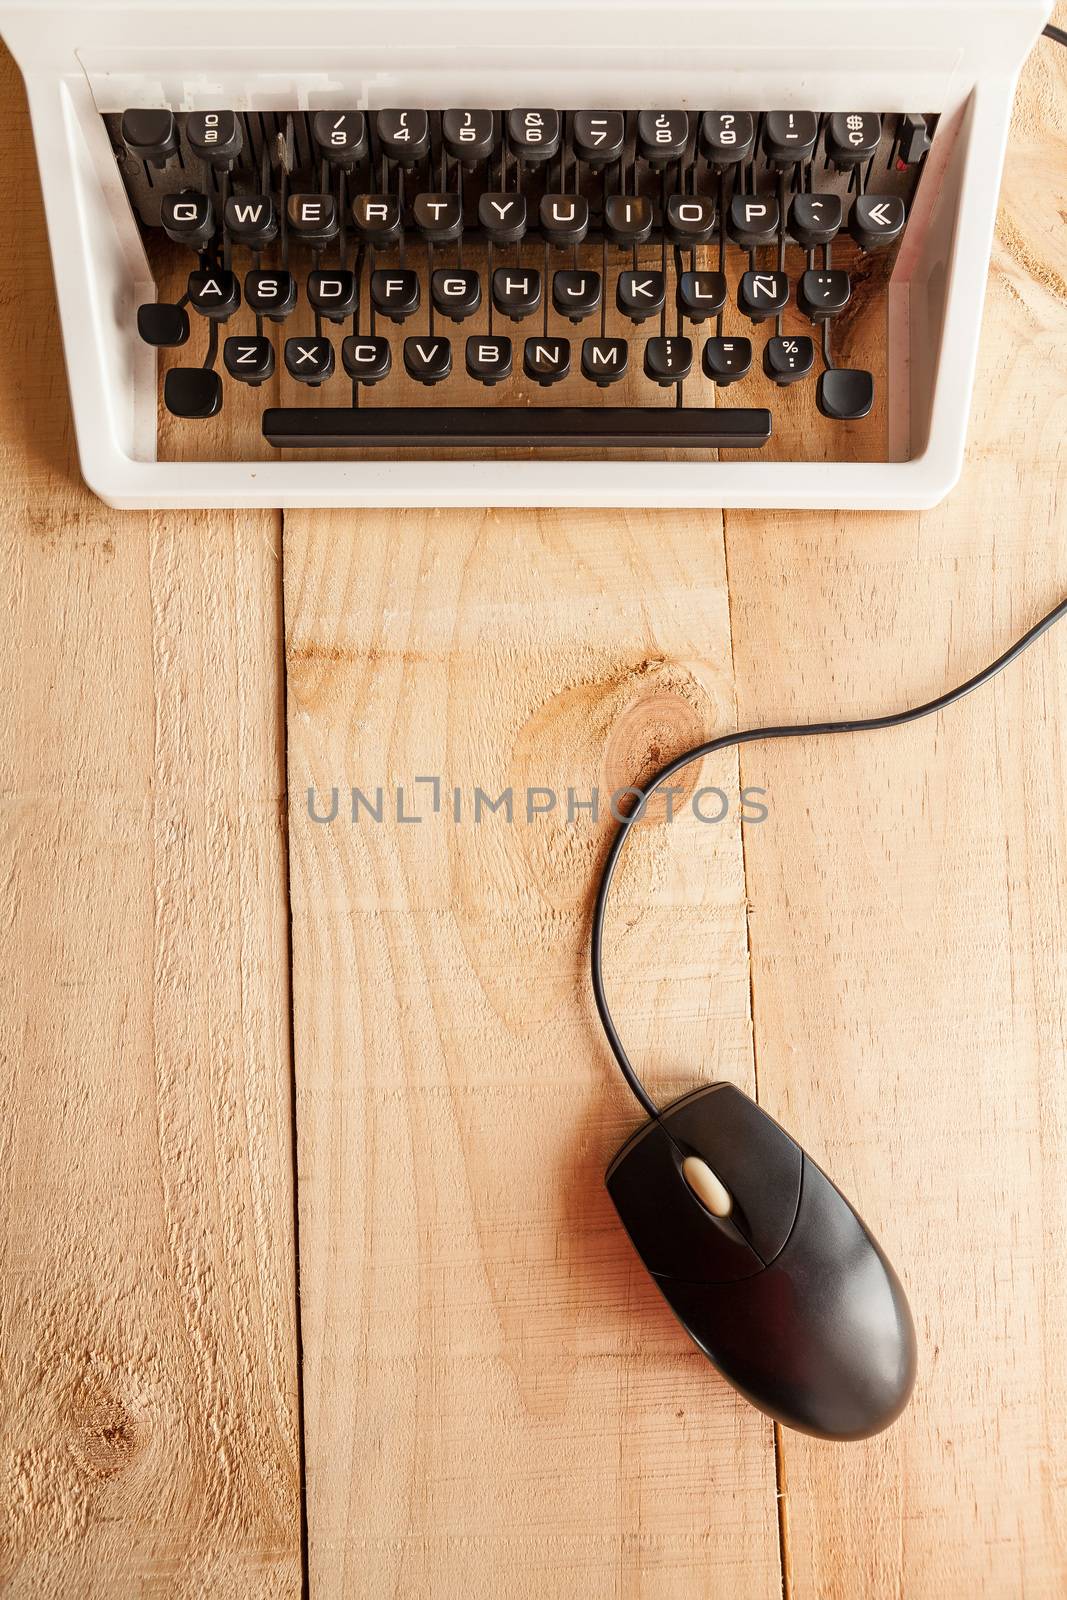 The typewriter and mouse by andongob